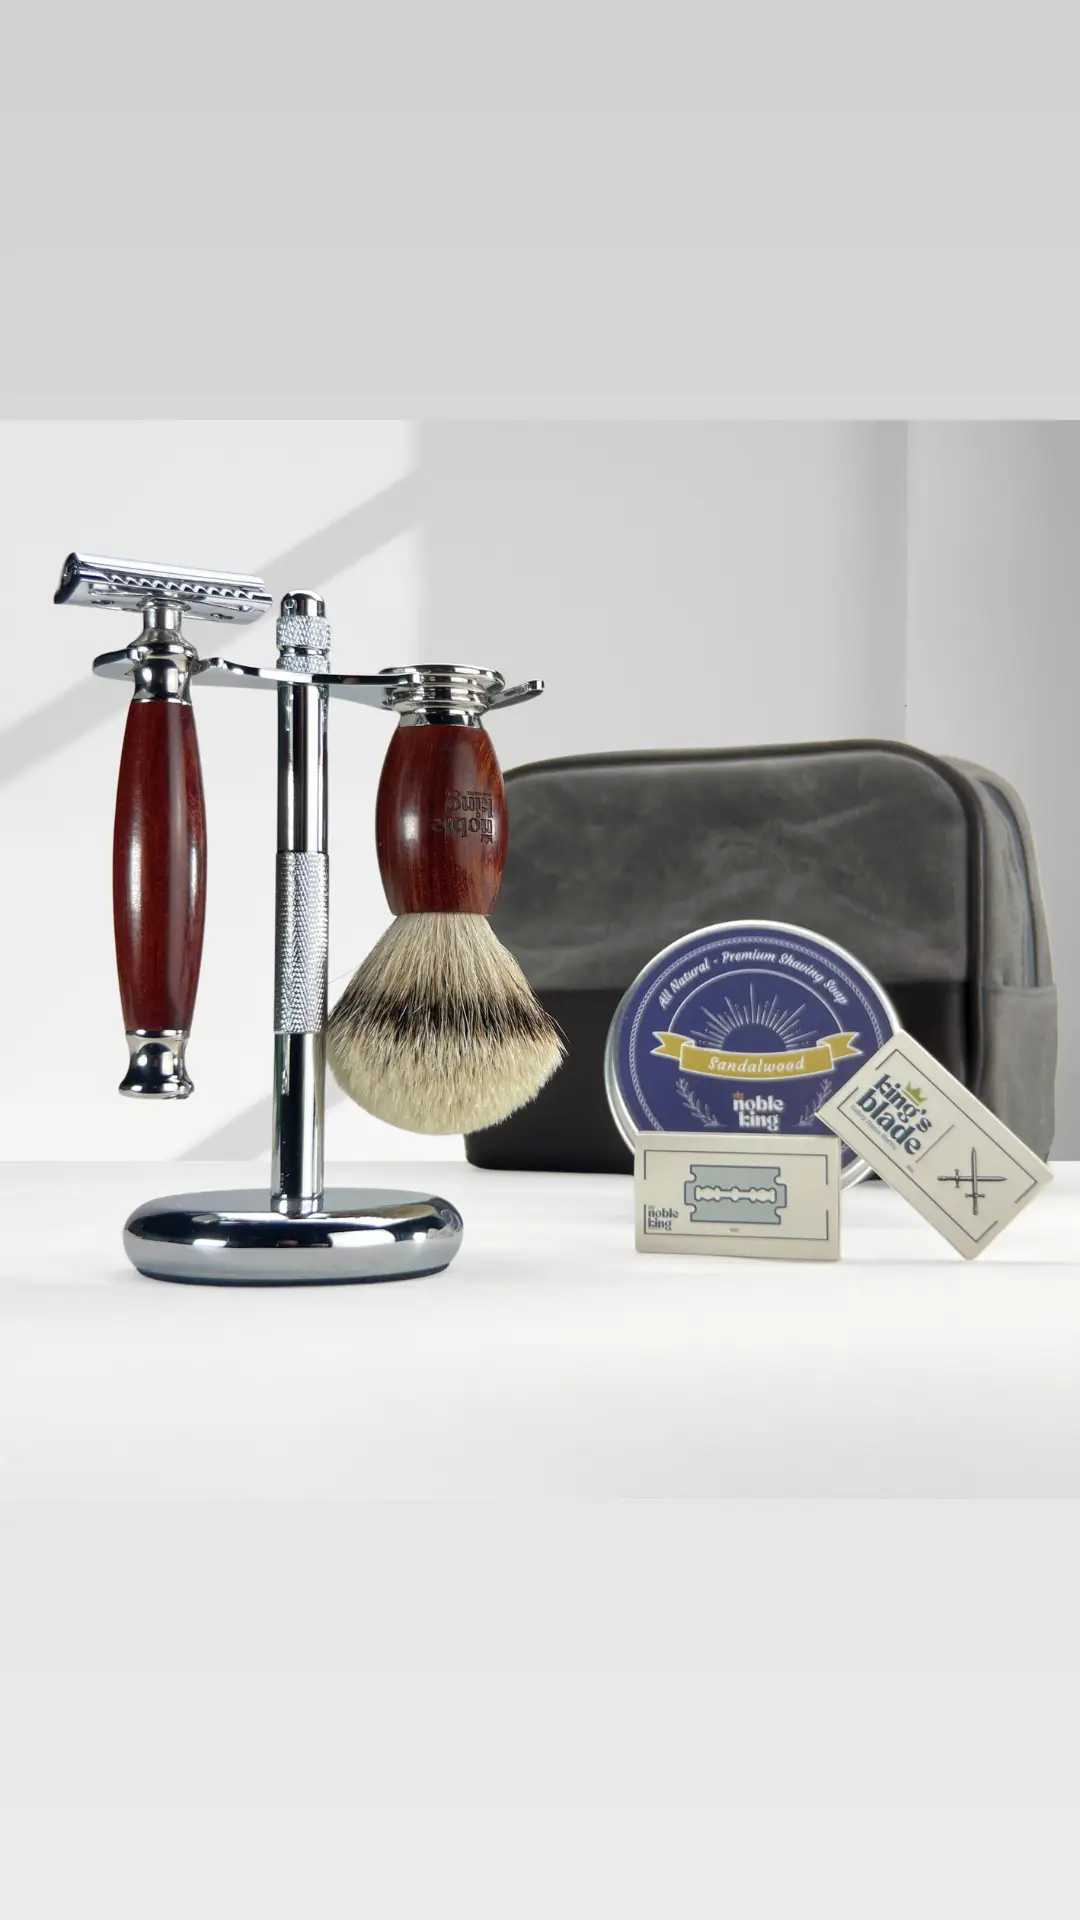 DAD WILL LOVE THIS 🪒 Our Father’s Day sale is going on now! $30 off our luxury shaving kit and free 2-day shipping! Link in bio 🔥 #fathersdaygifts #giftsfordad #giftsforhim #mensfashion #reels #giftsforhusband #mensgifts #mensgrooming #shaving #beard #beardgang 